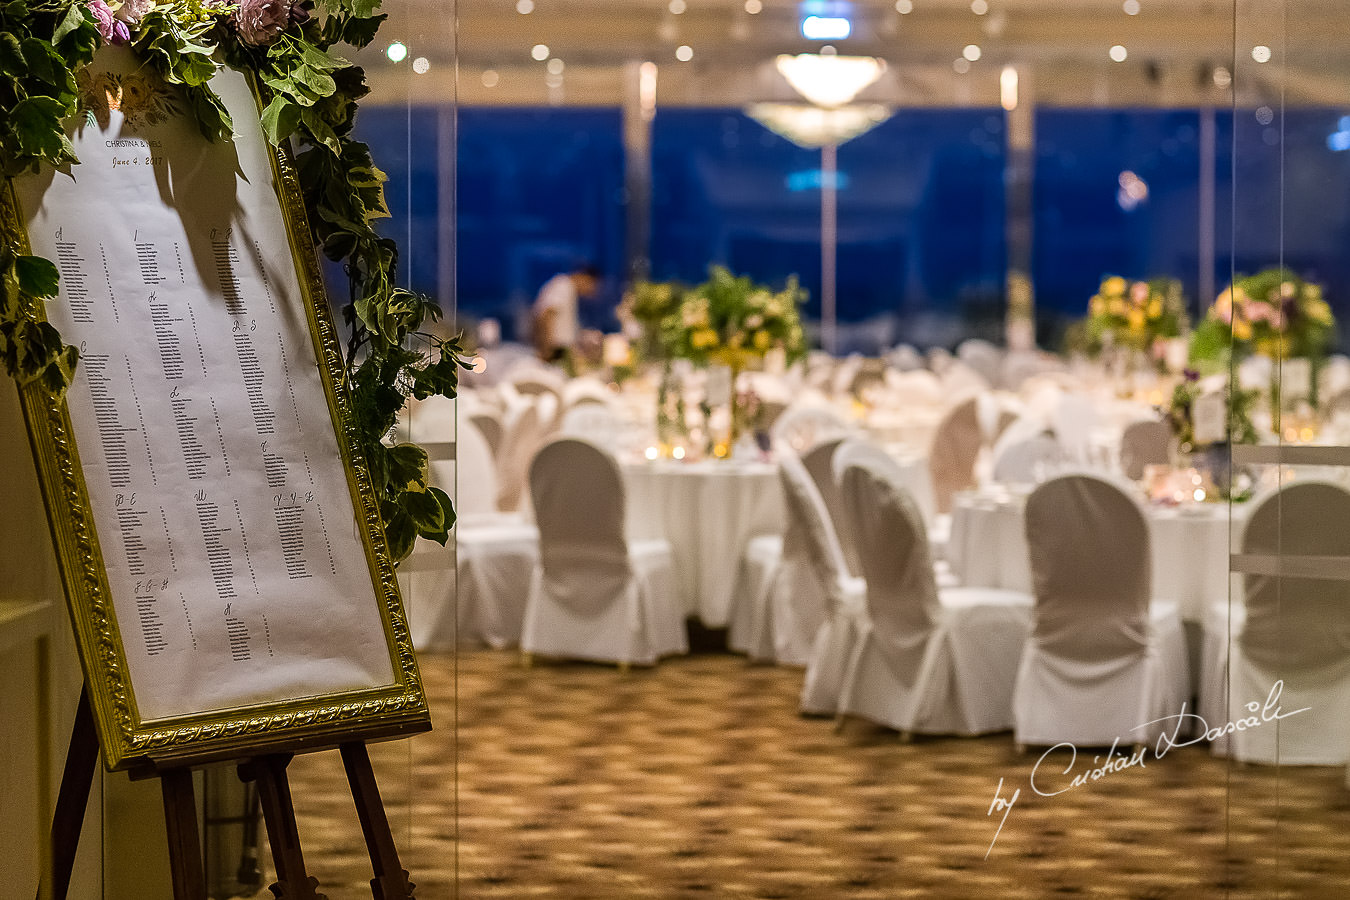 Moments captured during a beautiful wedding at St. Raphael Resort in Limassol, Cyprus.